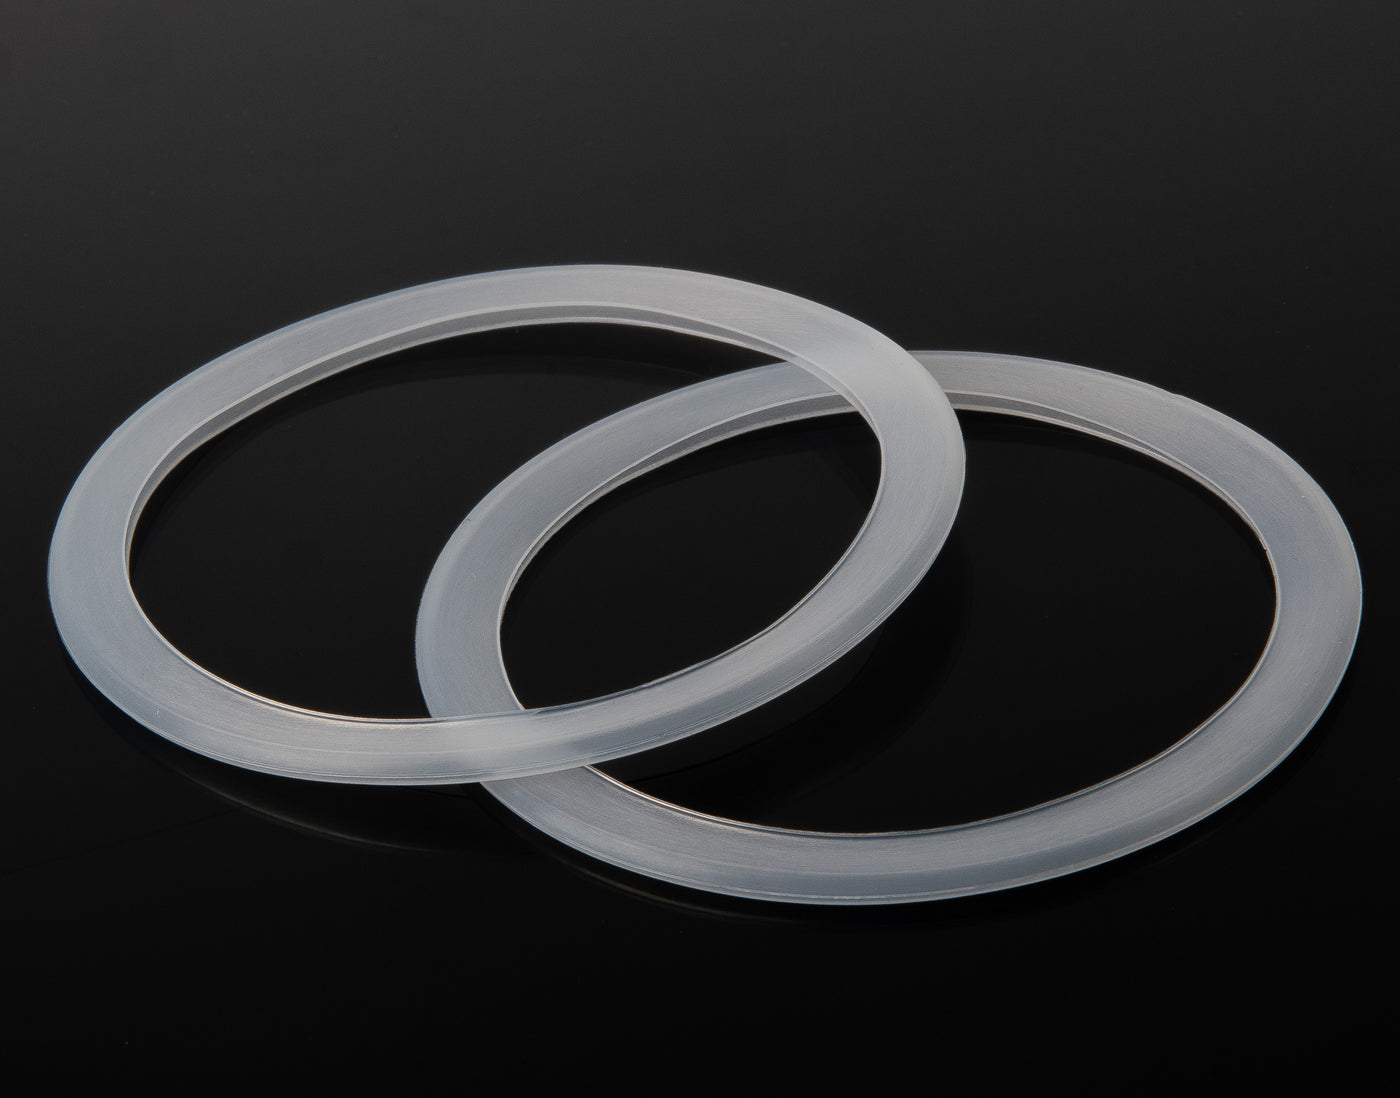 Angel Silicon Ring (2 Rings)